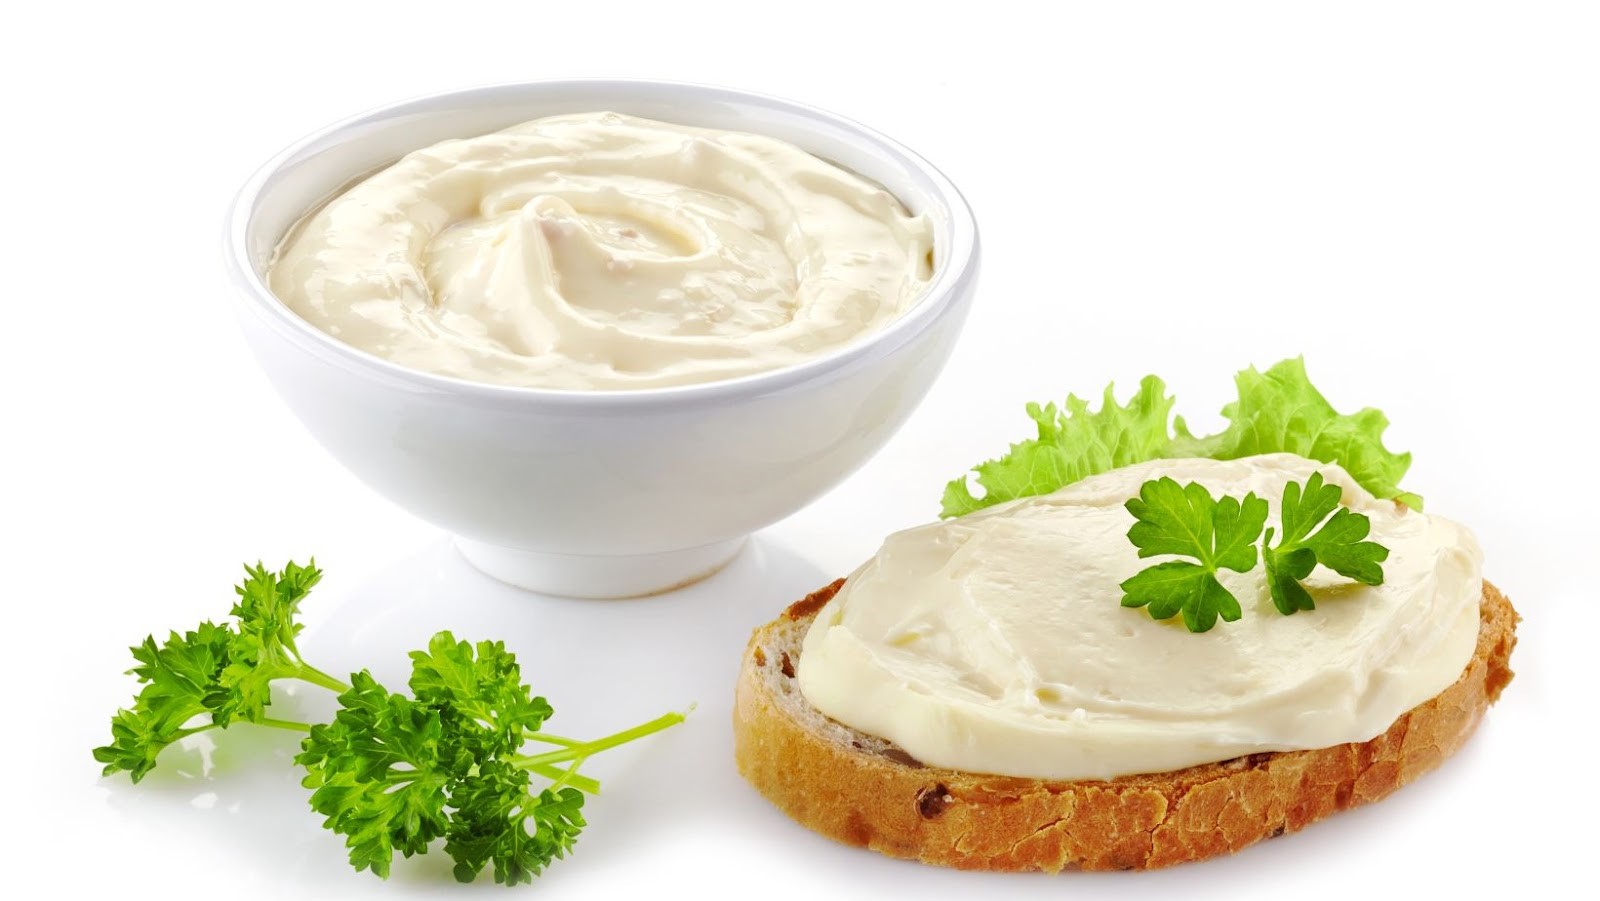 is cream cheese good for keto